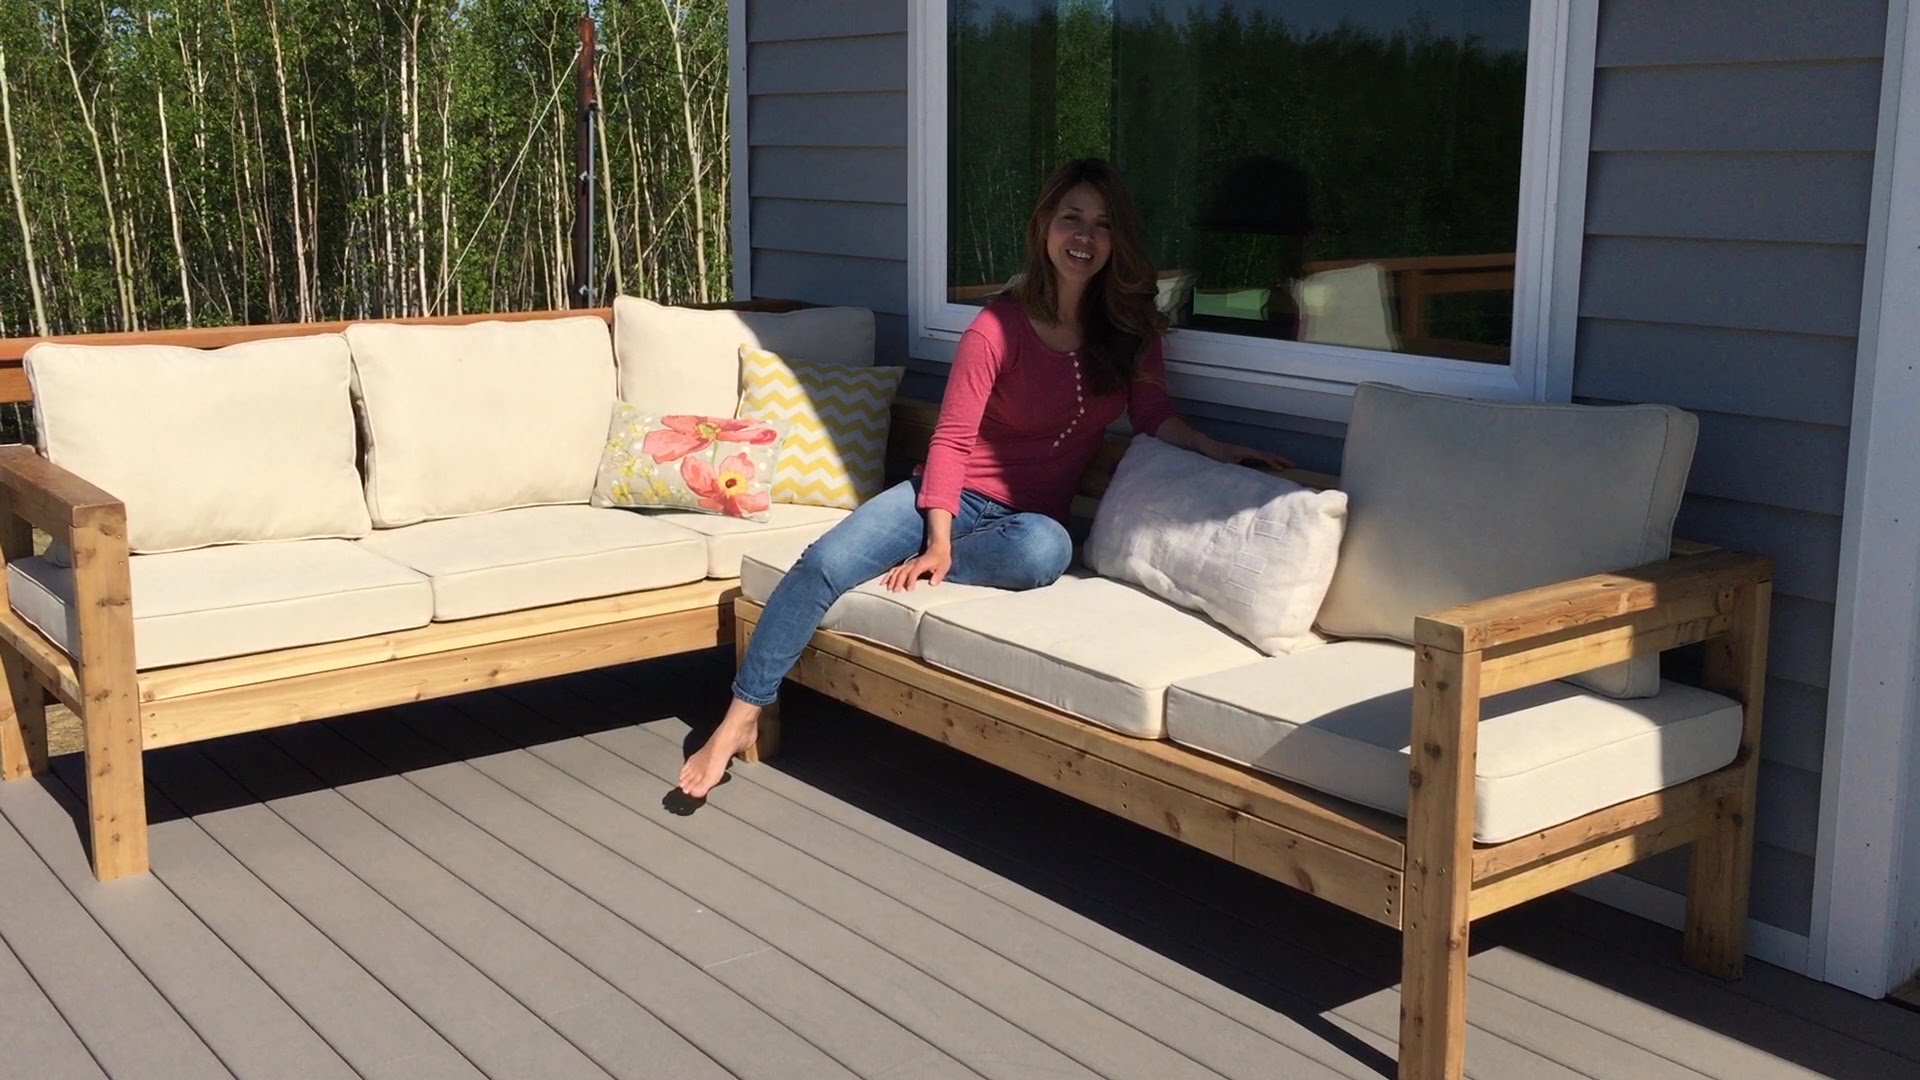 diy outdoor furniture how to build a 2x4 outdoor sectional tutorial - youtube CMCMGNF